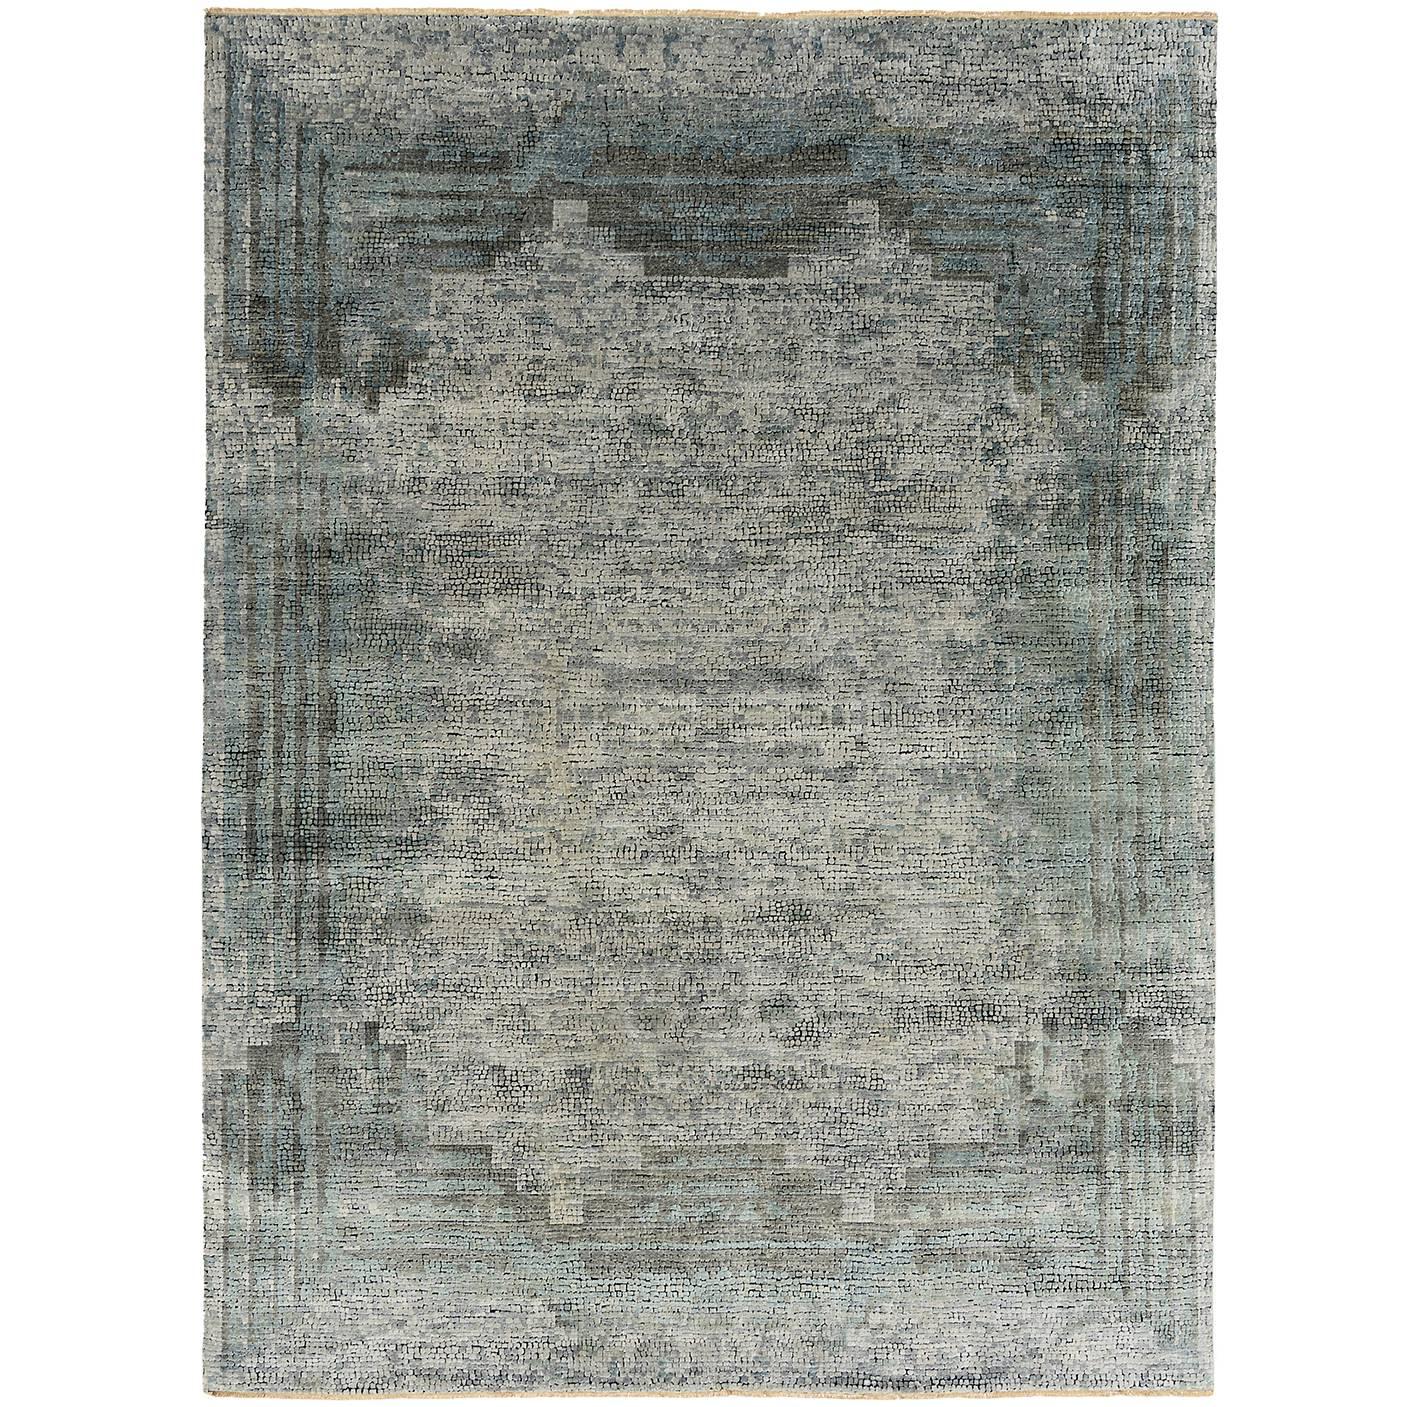 Luke Irwin Rugs: Caractacus, Mosaic Collection For Sale